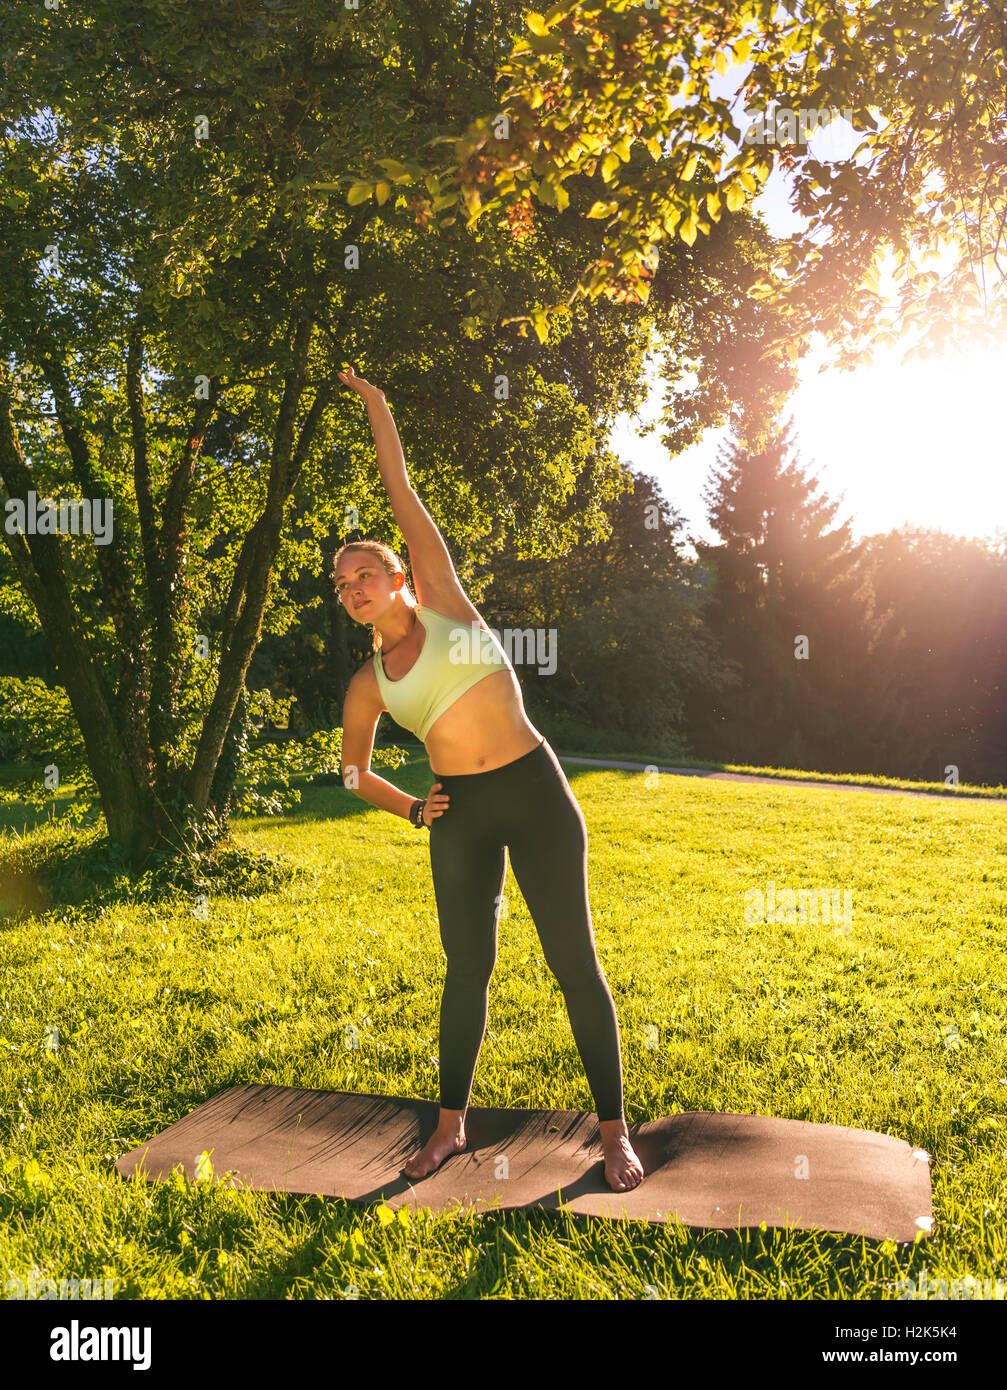 Warmup exercise, young woman in sportswear doing workout on mat in park, Munich, Upper Bavaria, Bavaria, Germany Stock Photo